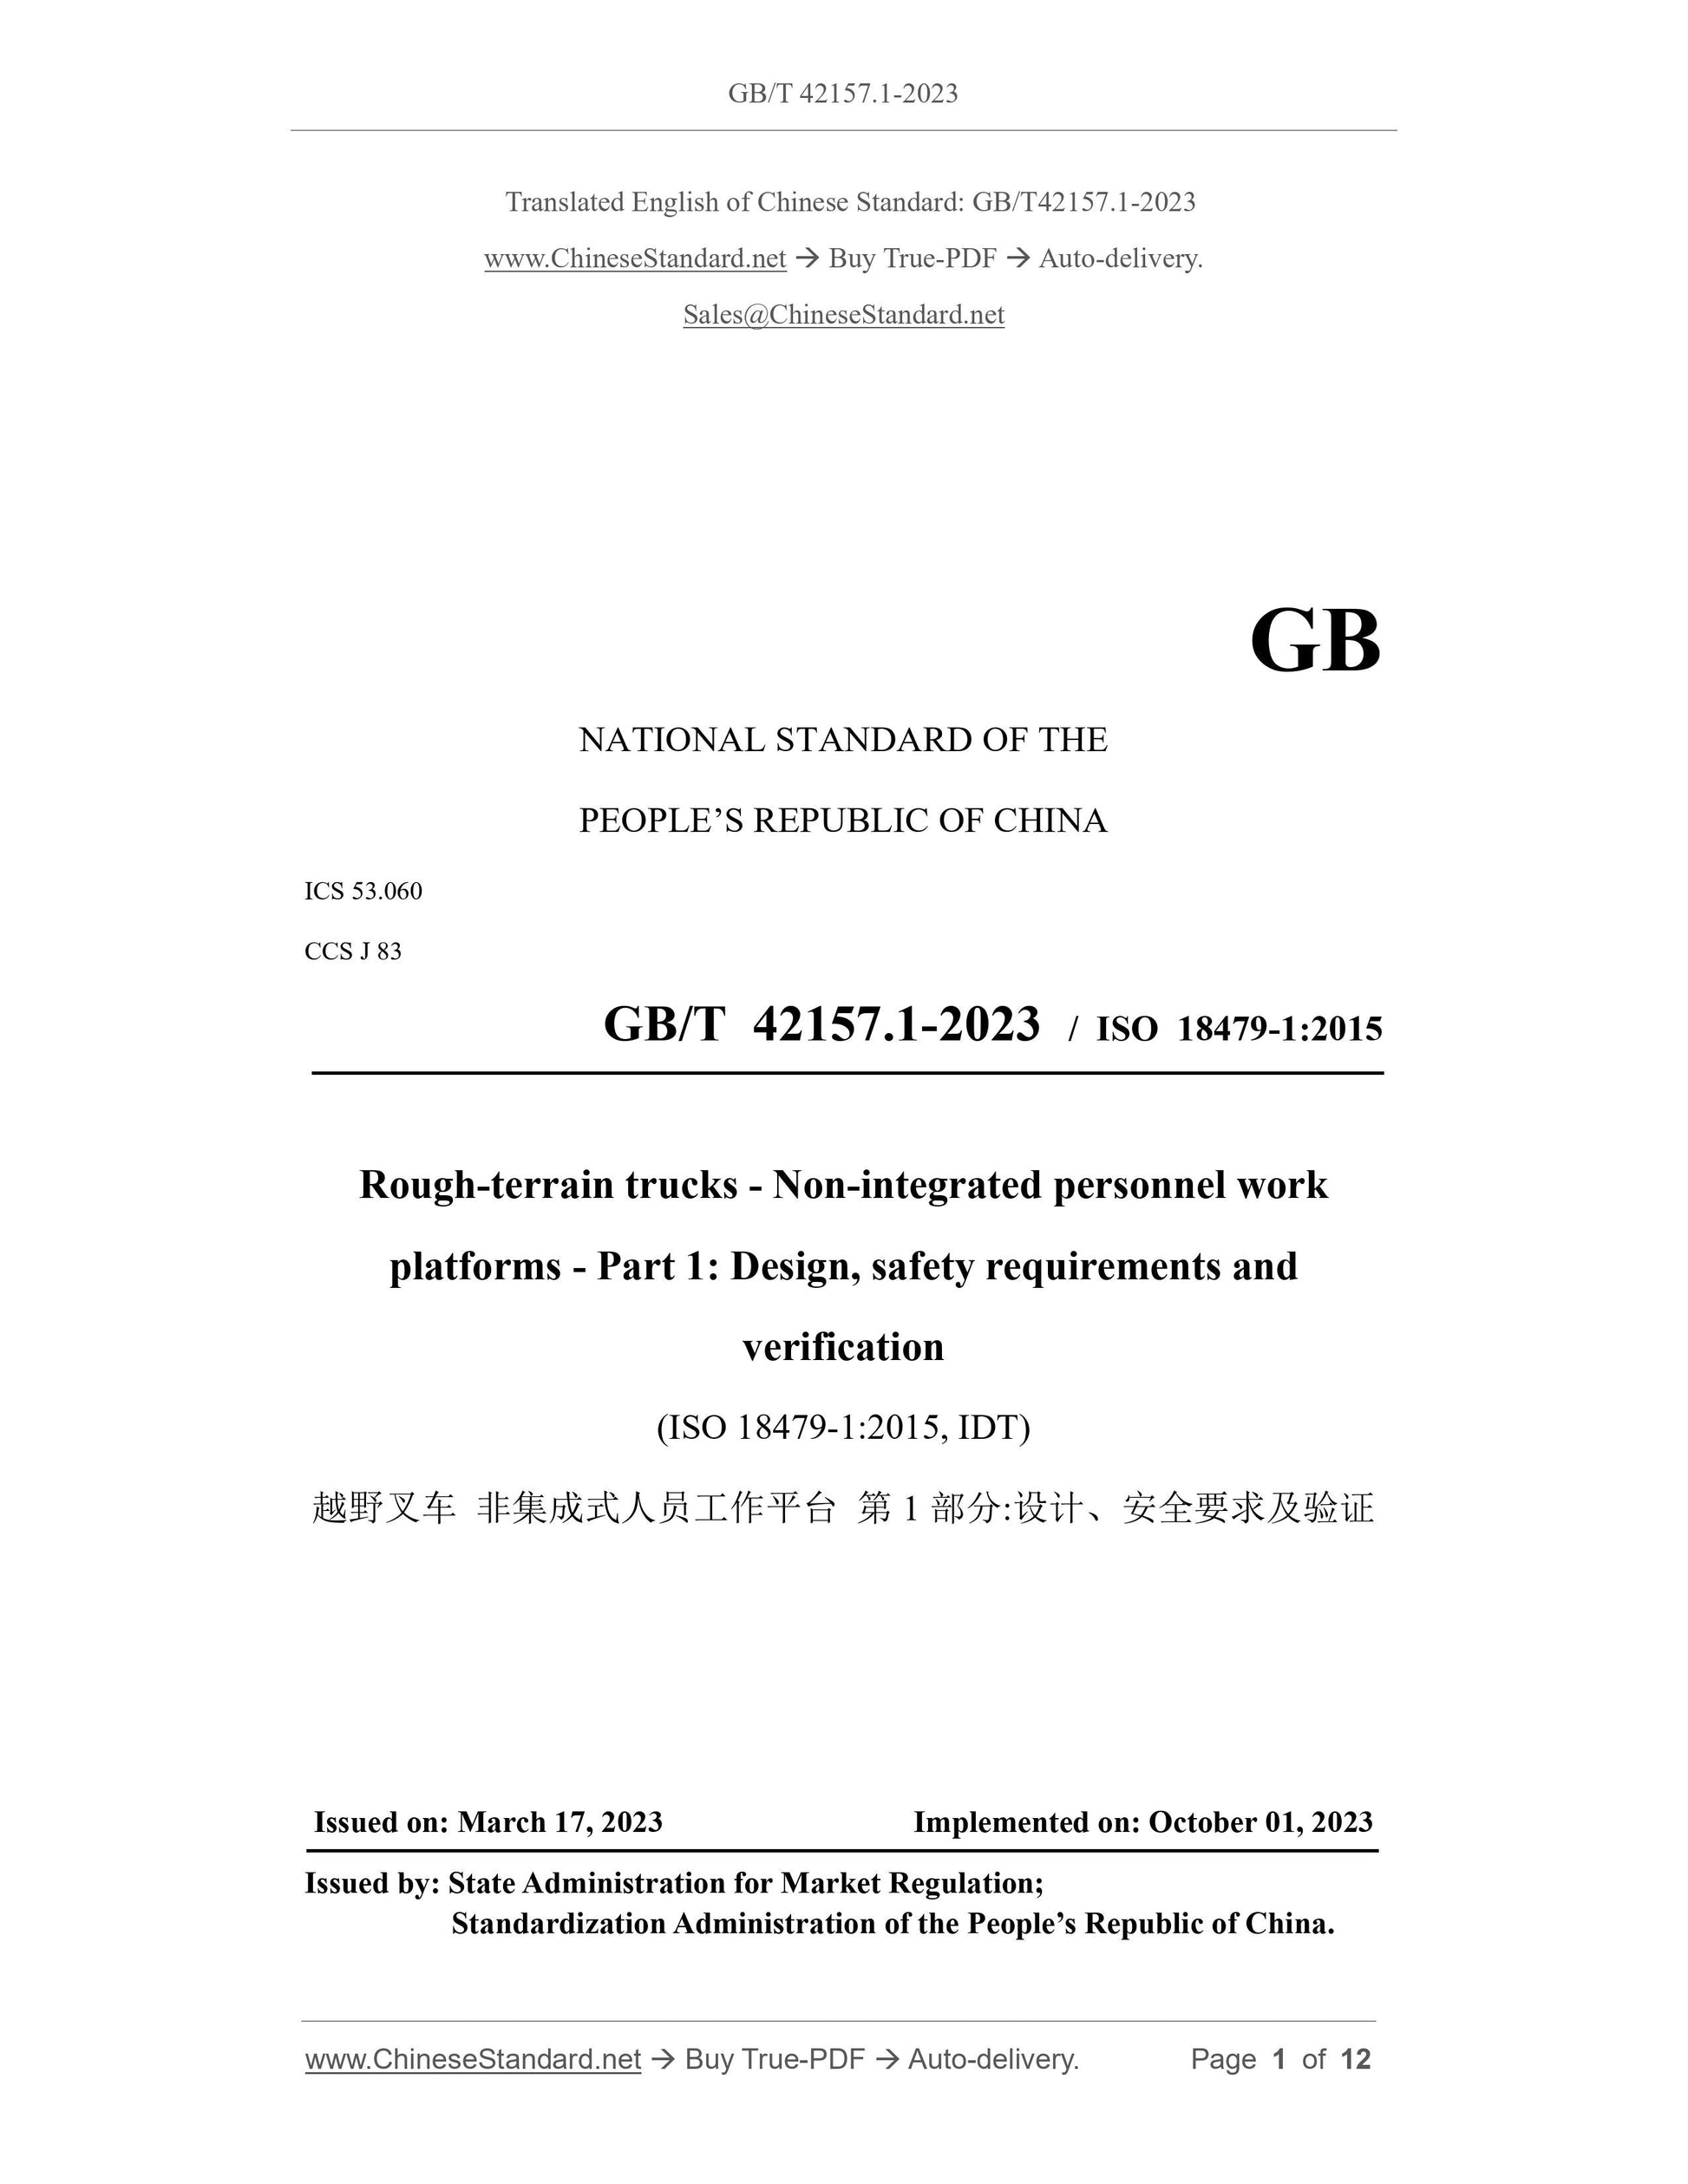 GB/T 42157.1-2023 Page 1